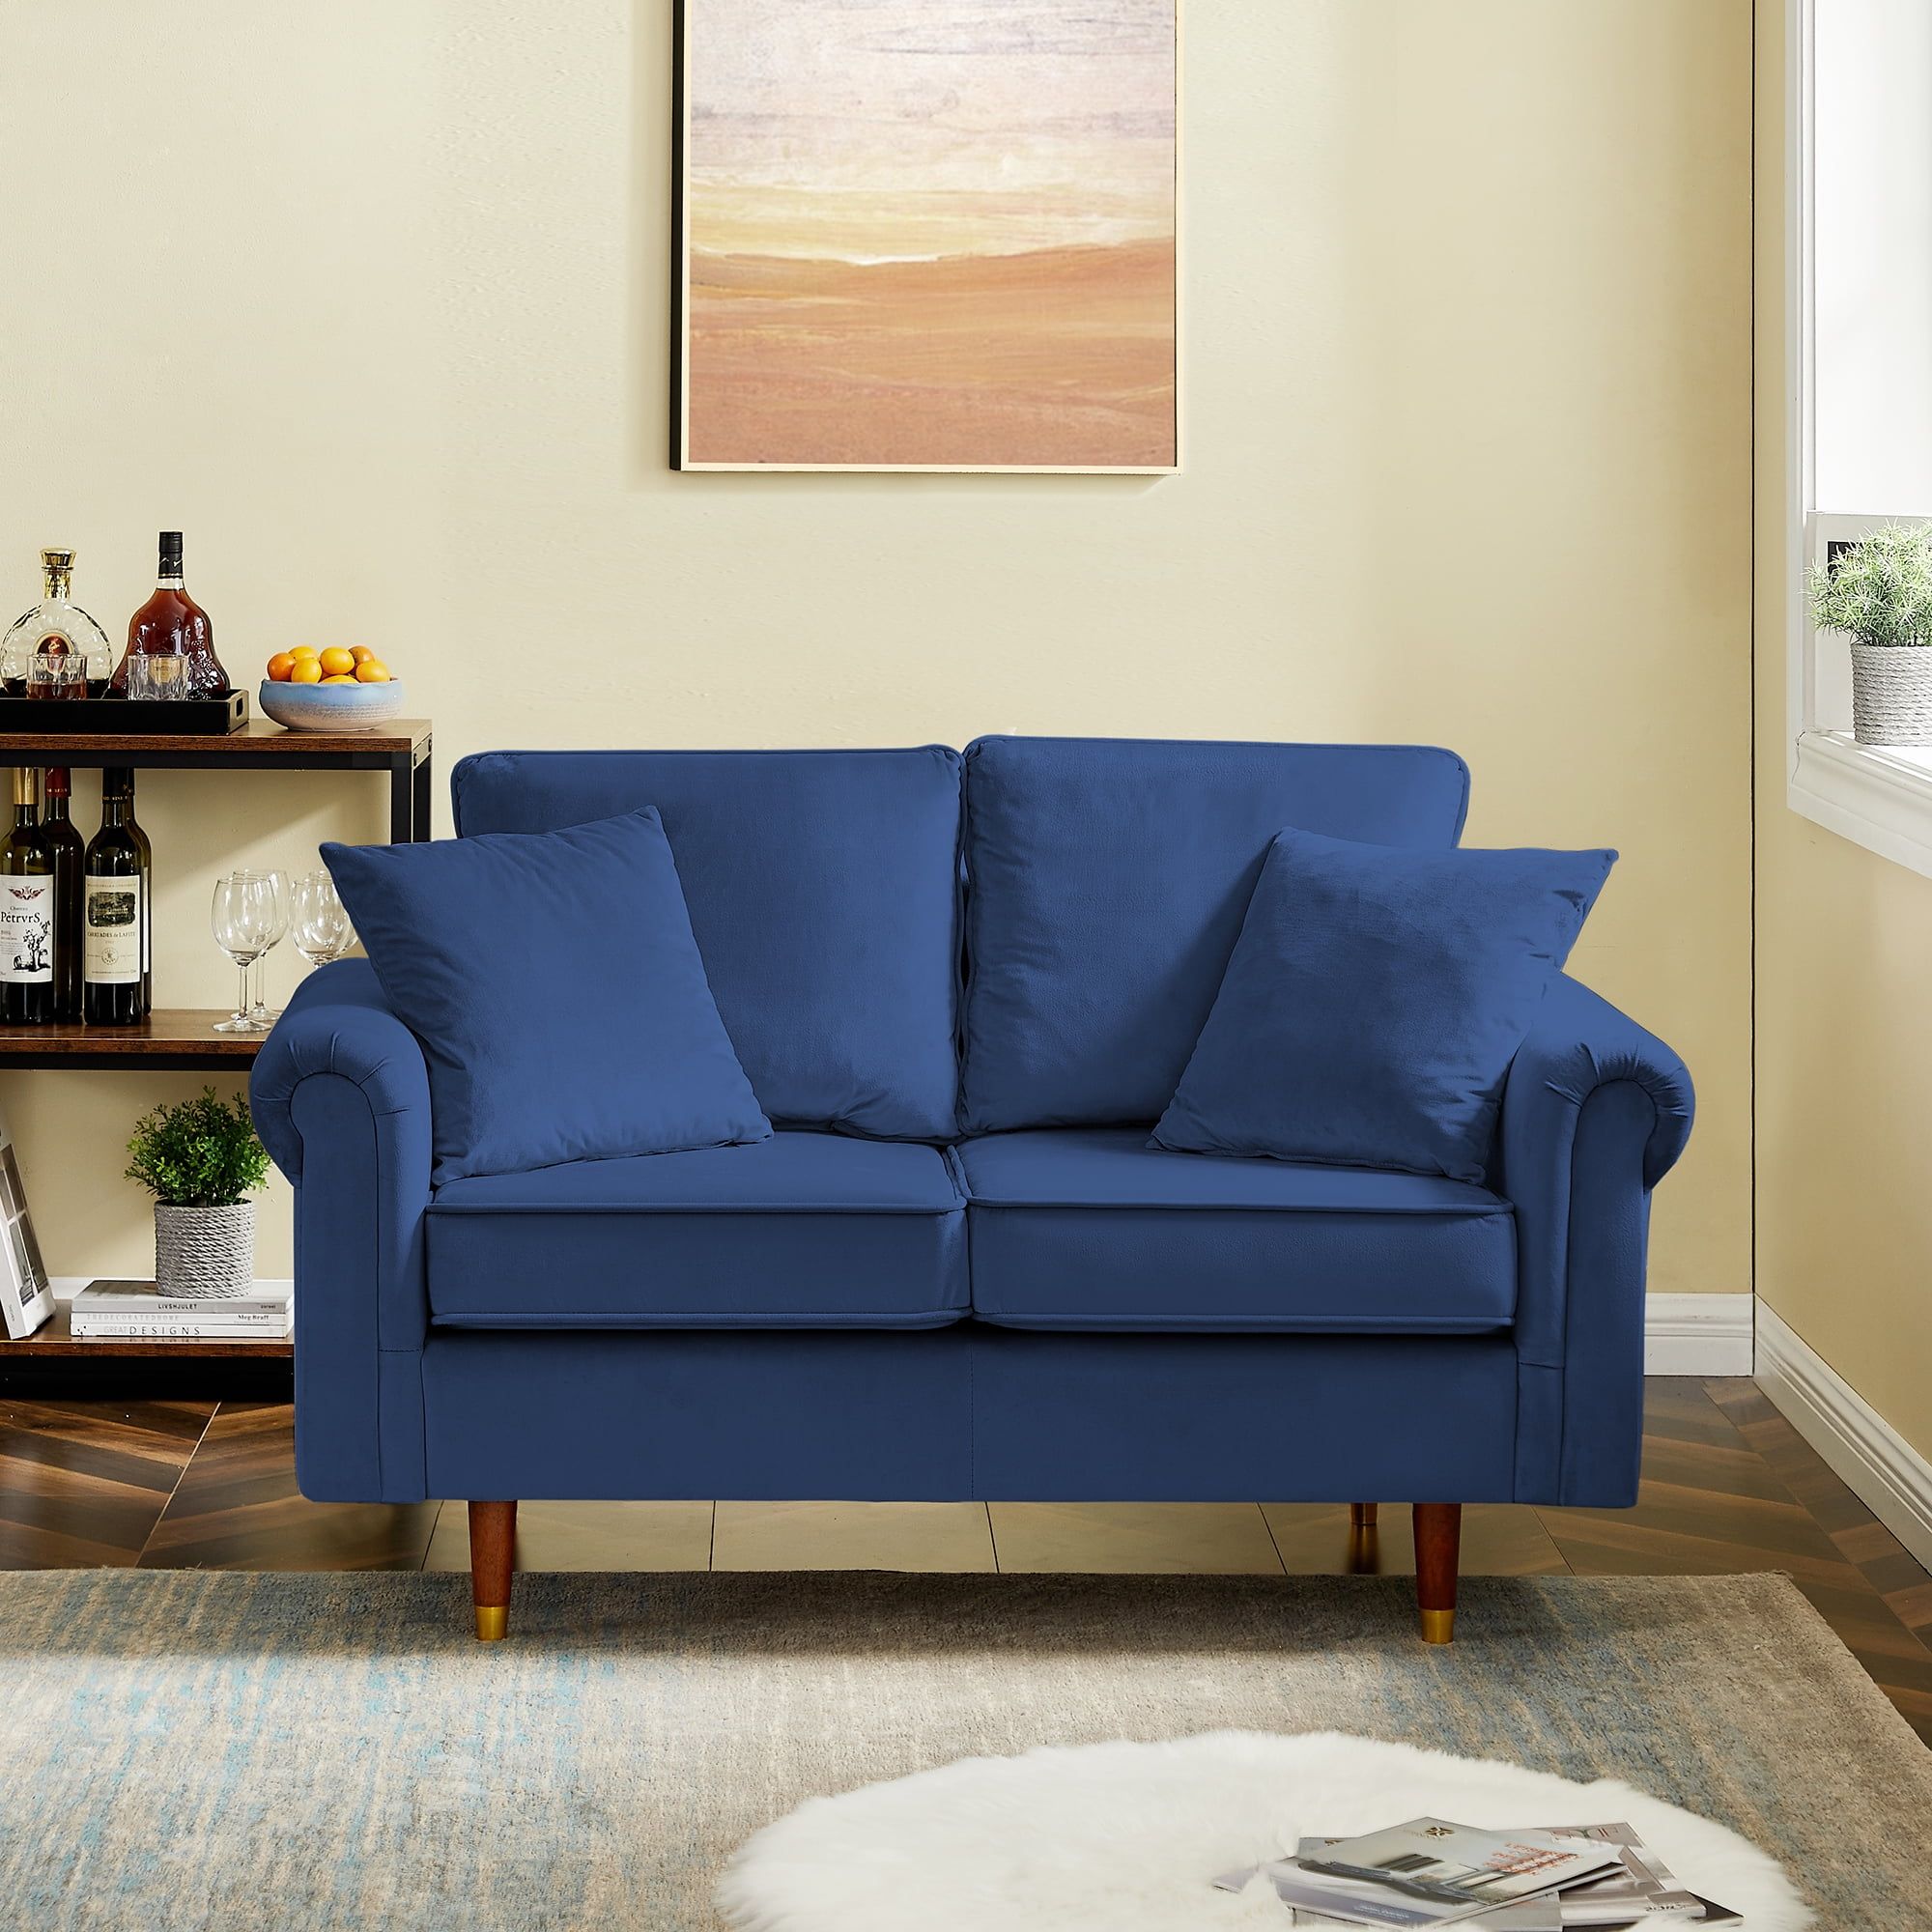 Modern Loveseat Sofa With 2 Pillows, Velvet Upholstered Love Seats Couch  For Small Living Room, Bedroom, Apartment, Easy Assembly, Blue – Walmart Within Small Love Seats In Velvet (View 13 of 15)